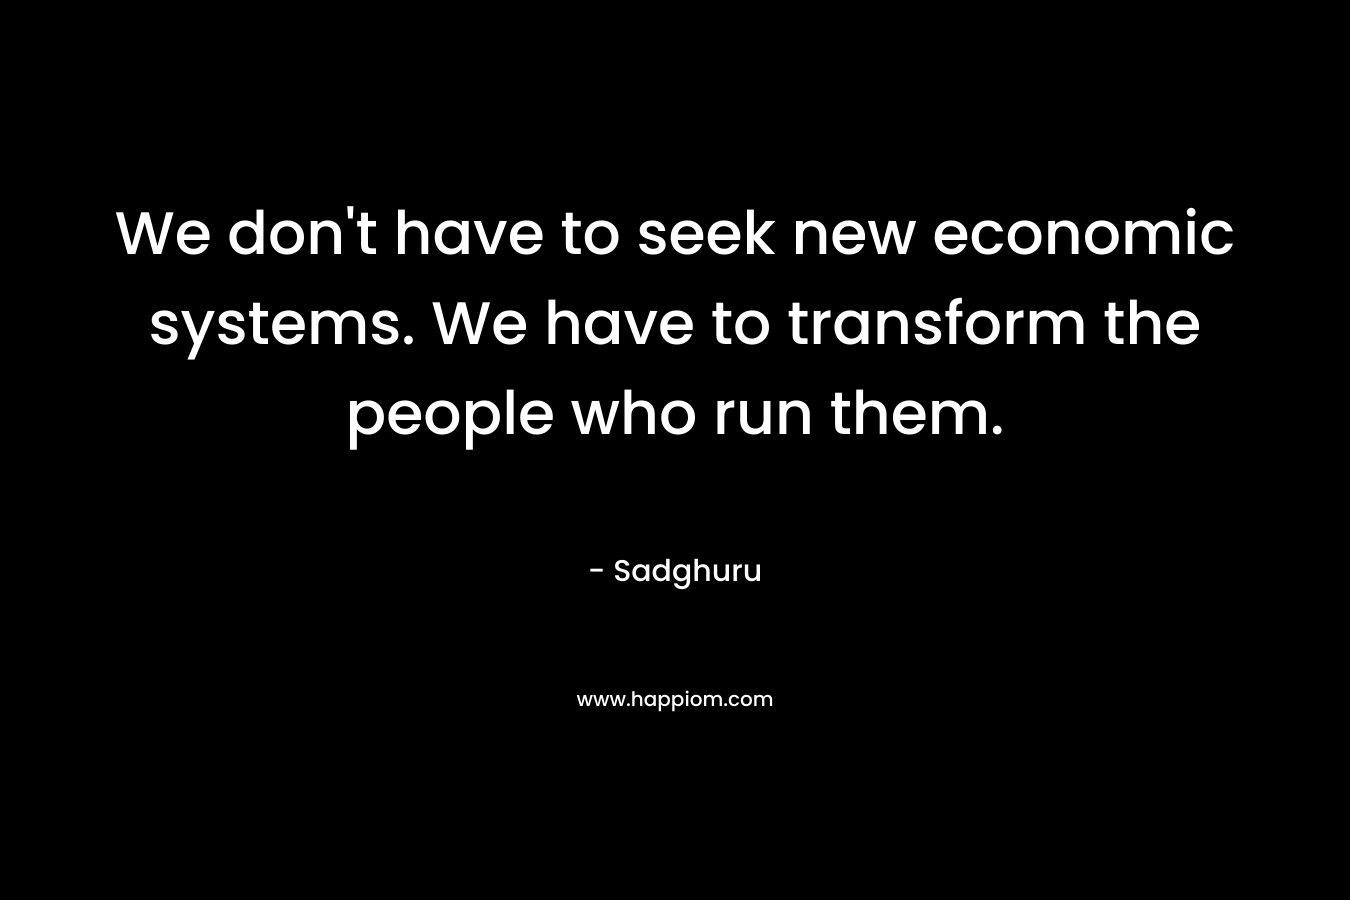 We don't have to seek new economic systems. We have to transform the people who run them.